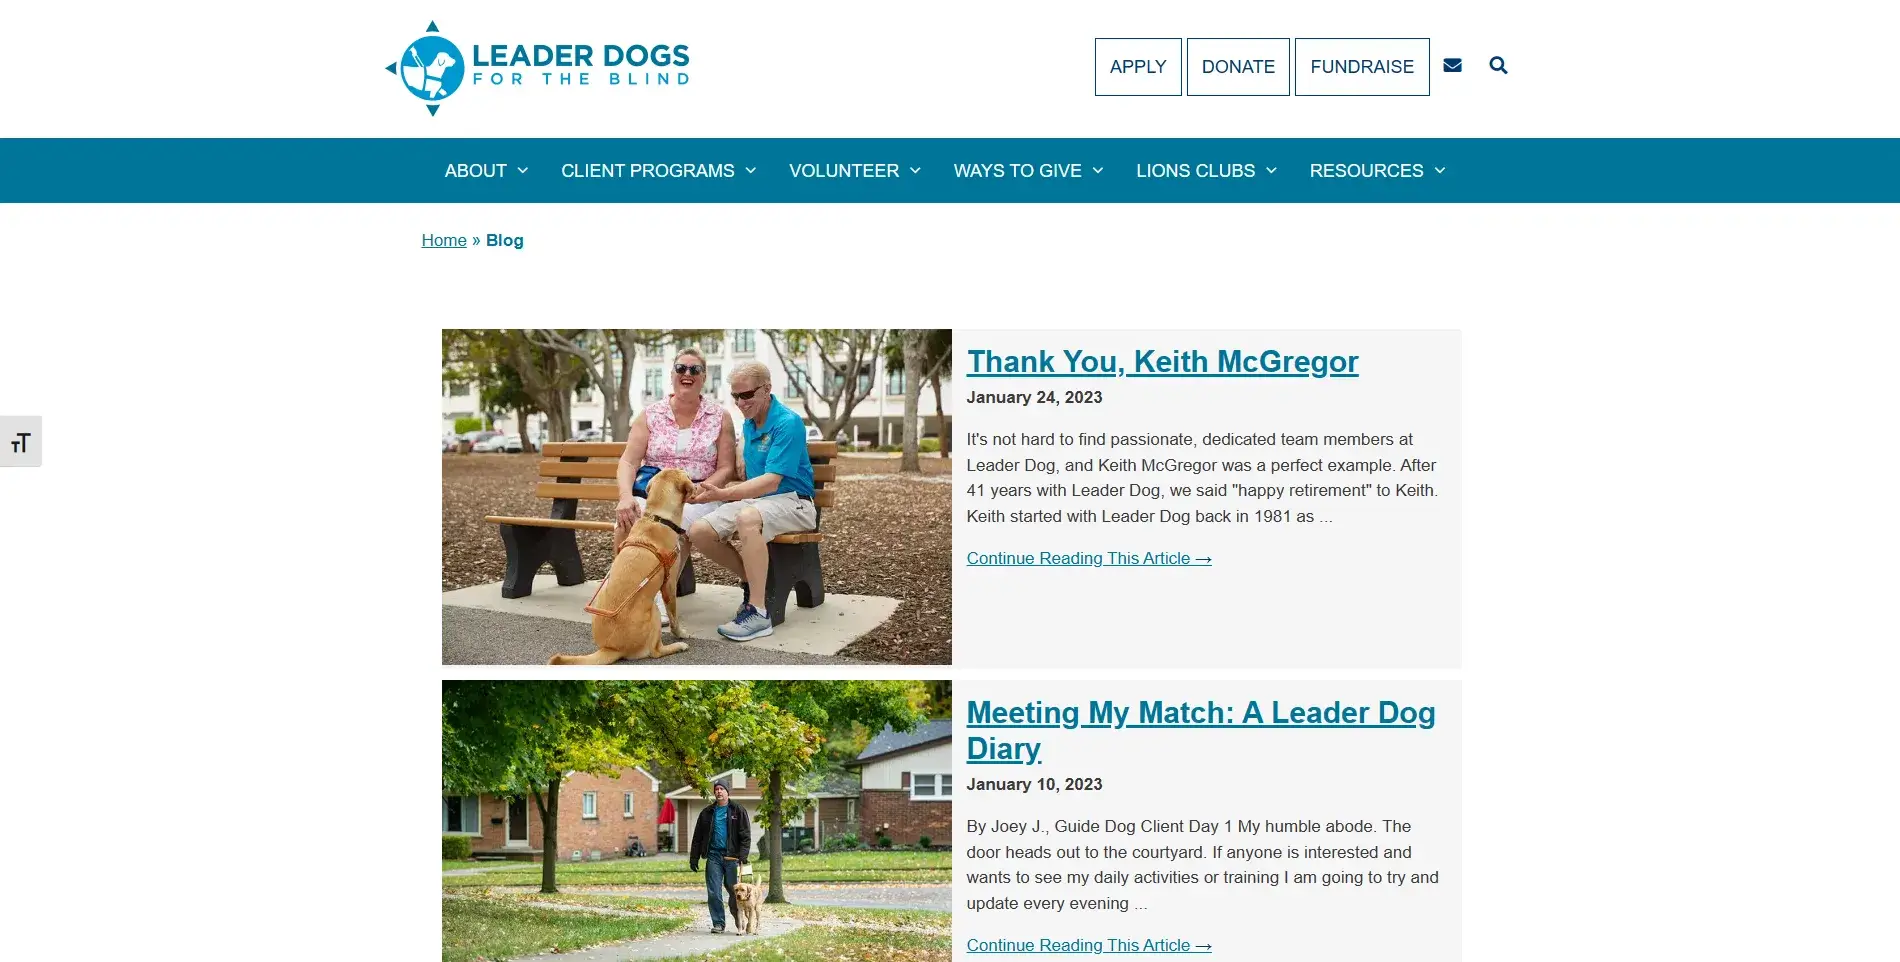 Leader Dogs